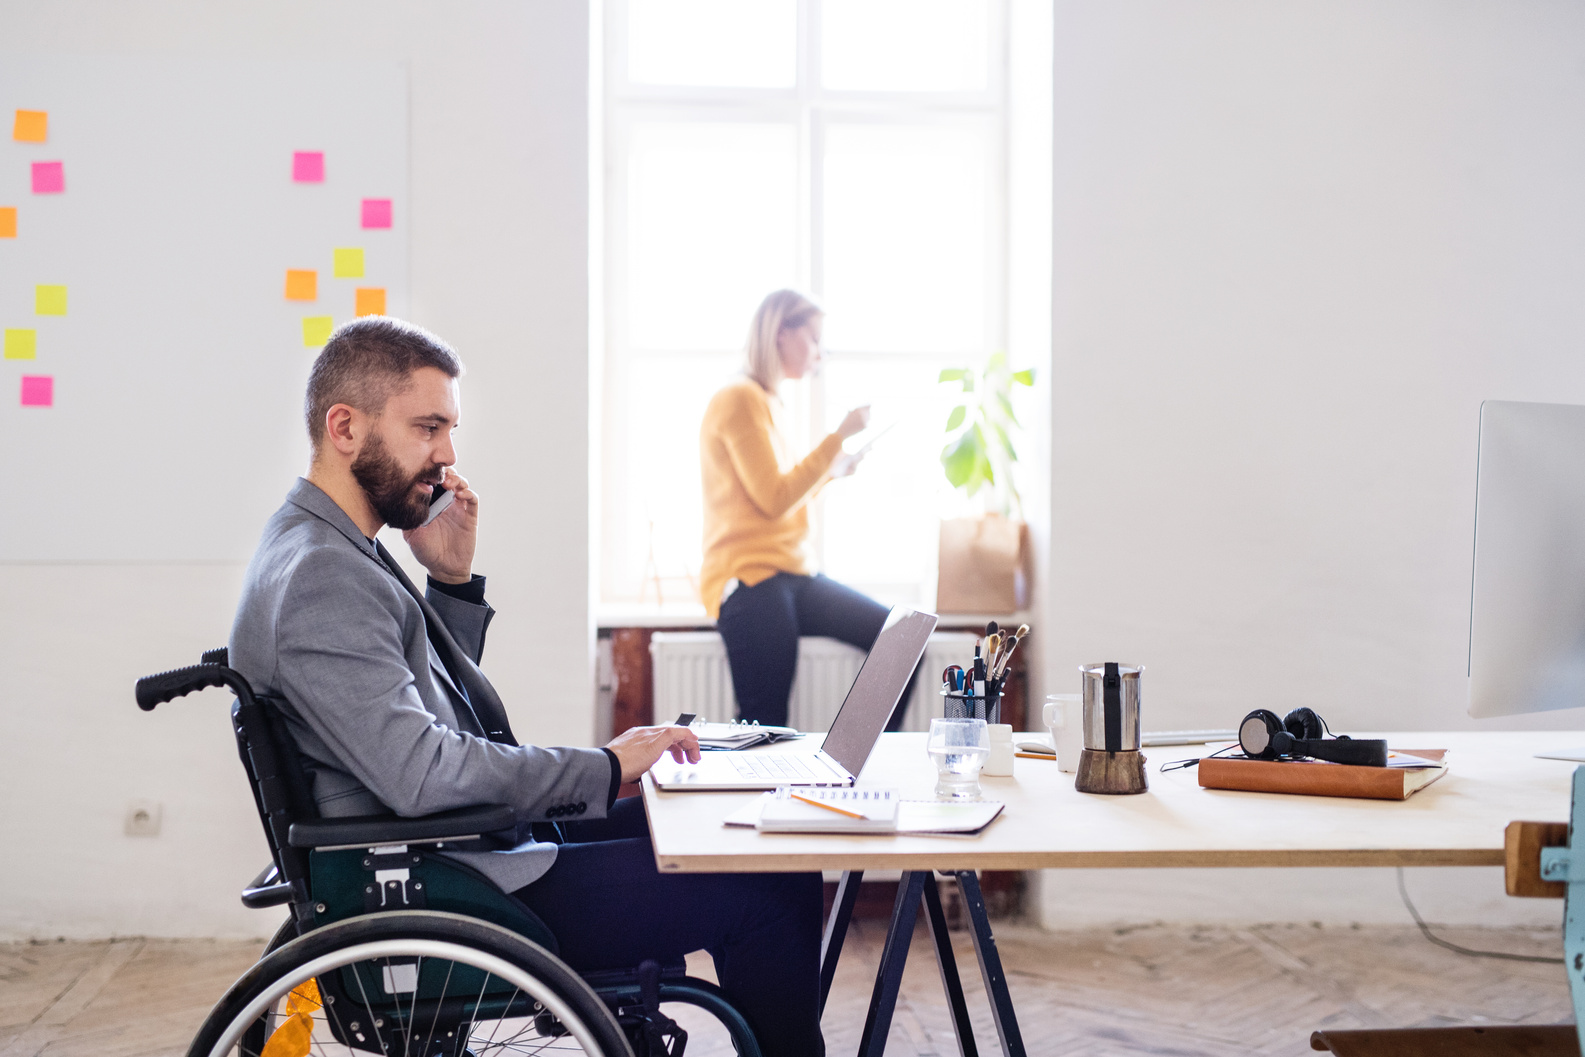 Two Business People with Wheelchair in the Office